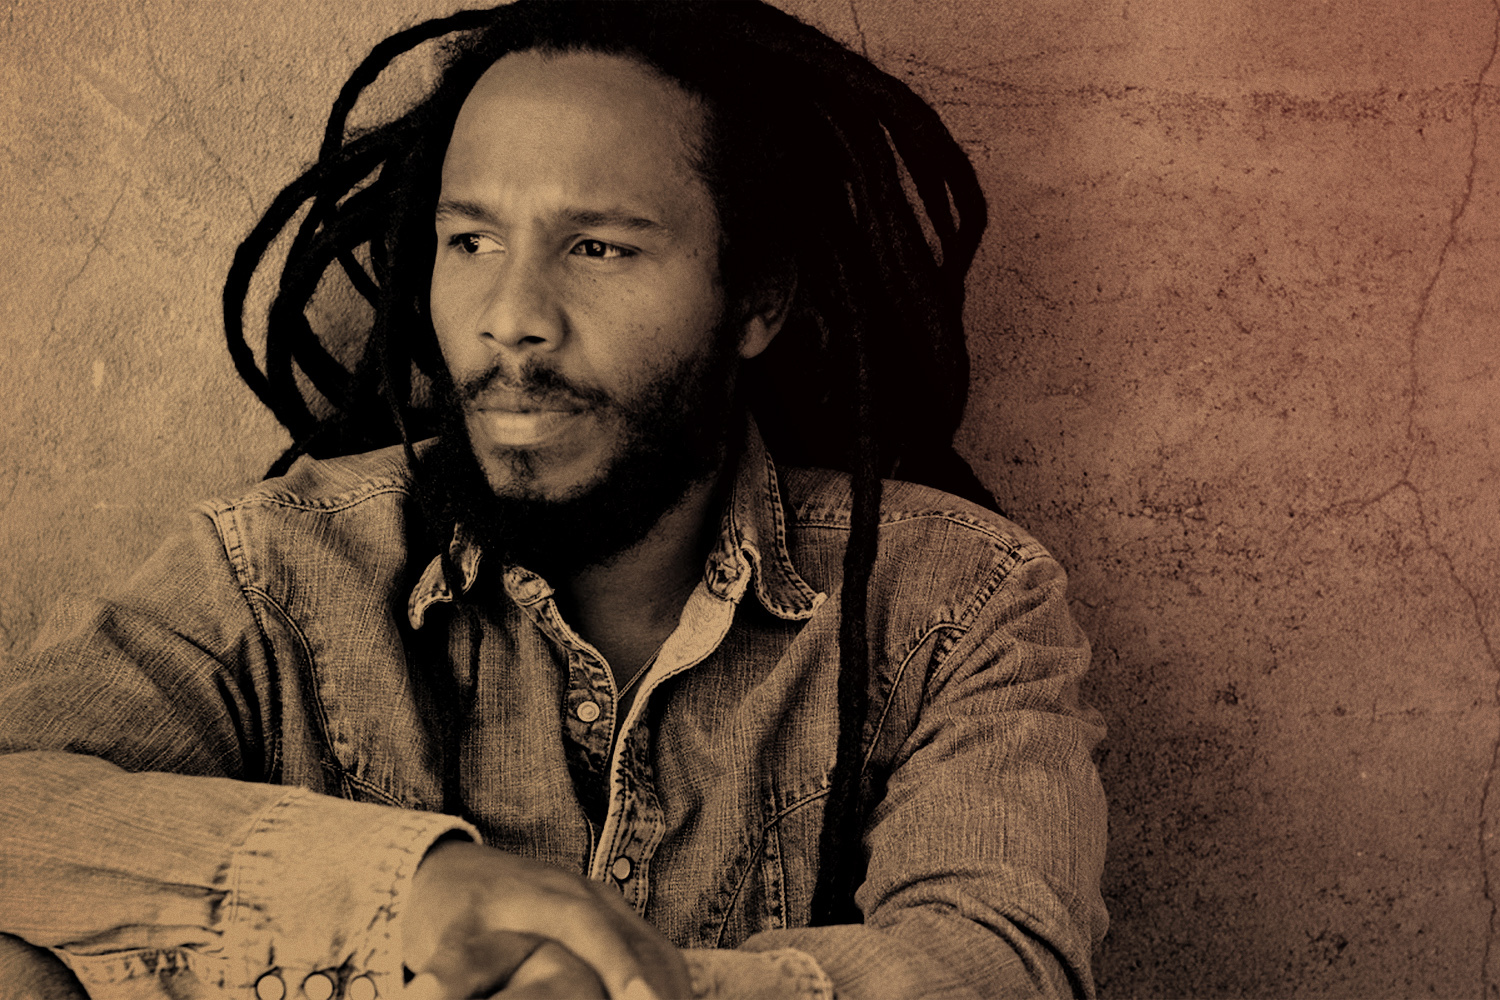 Eight-time Grammy Award-winning artist Ziggy Marley is out with a new children's book.